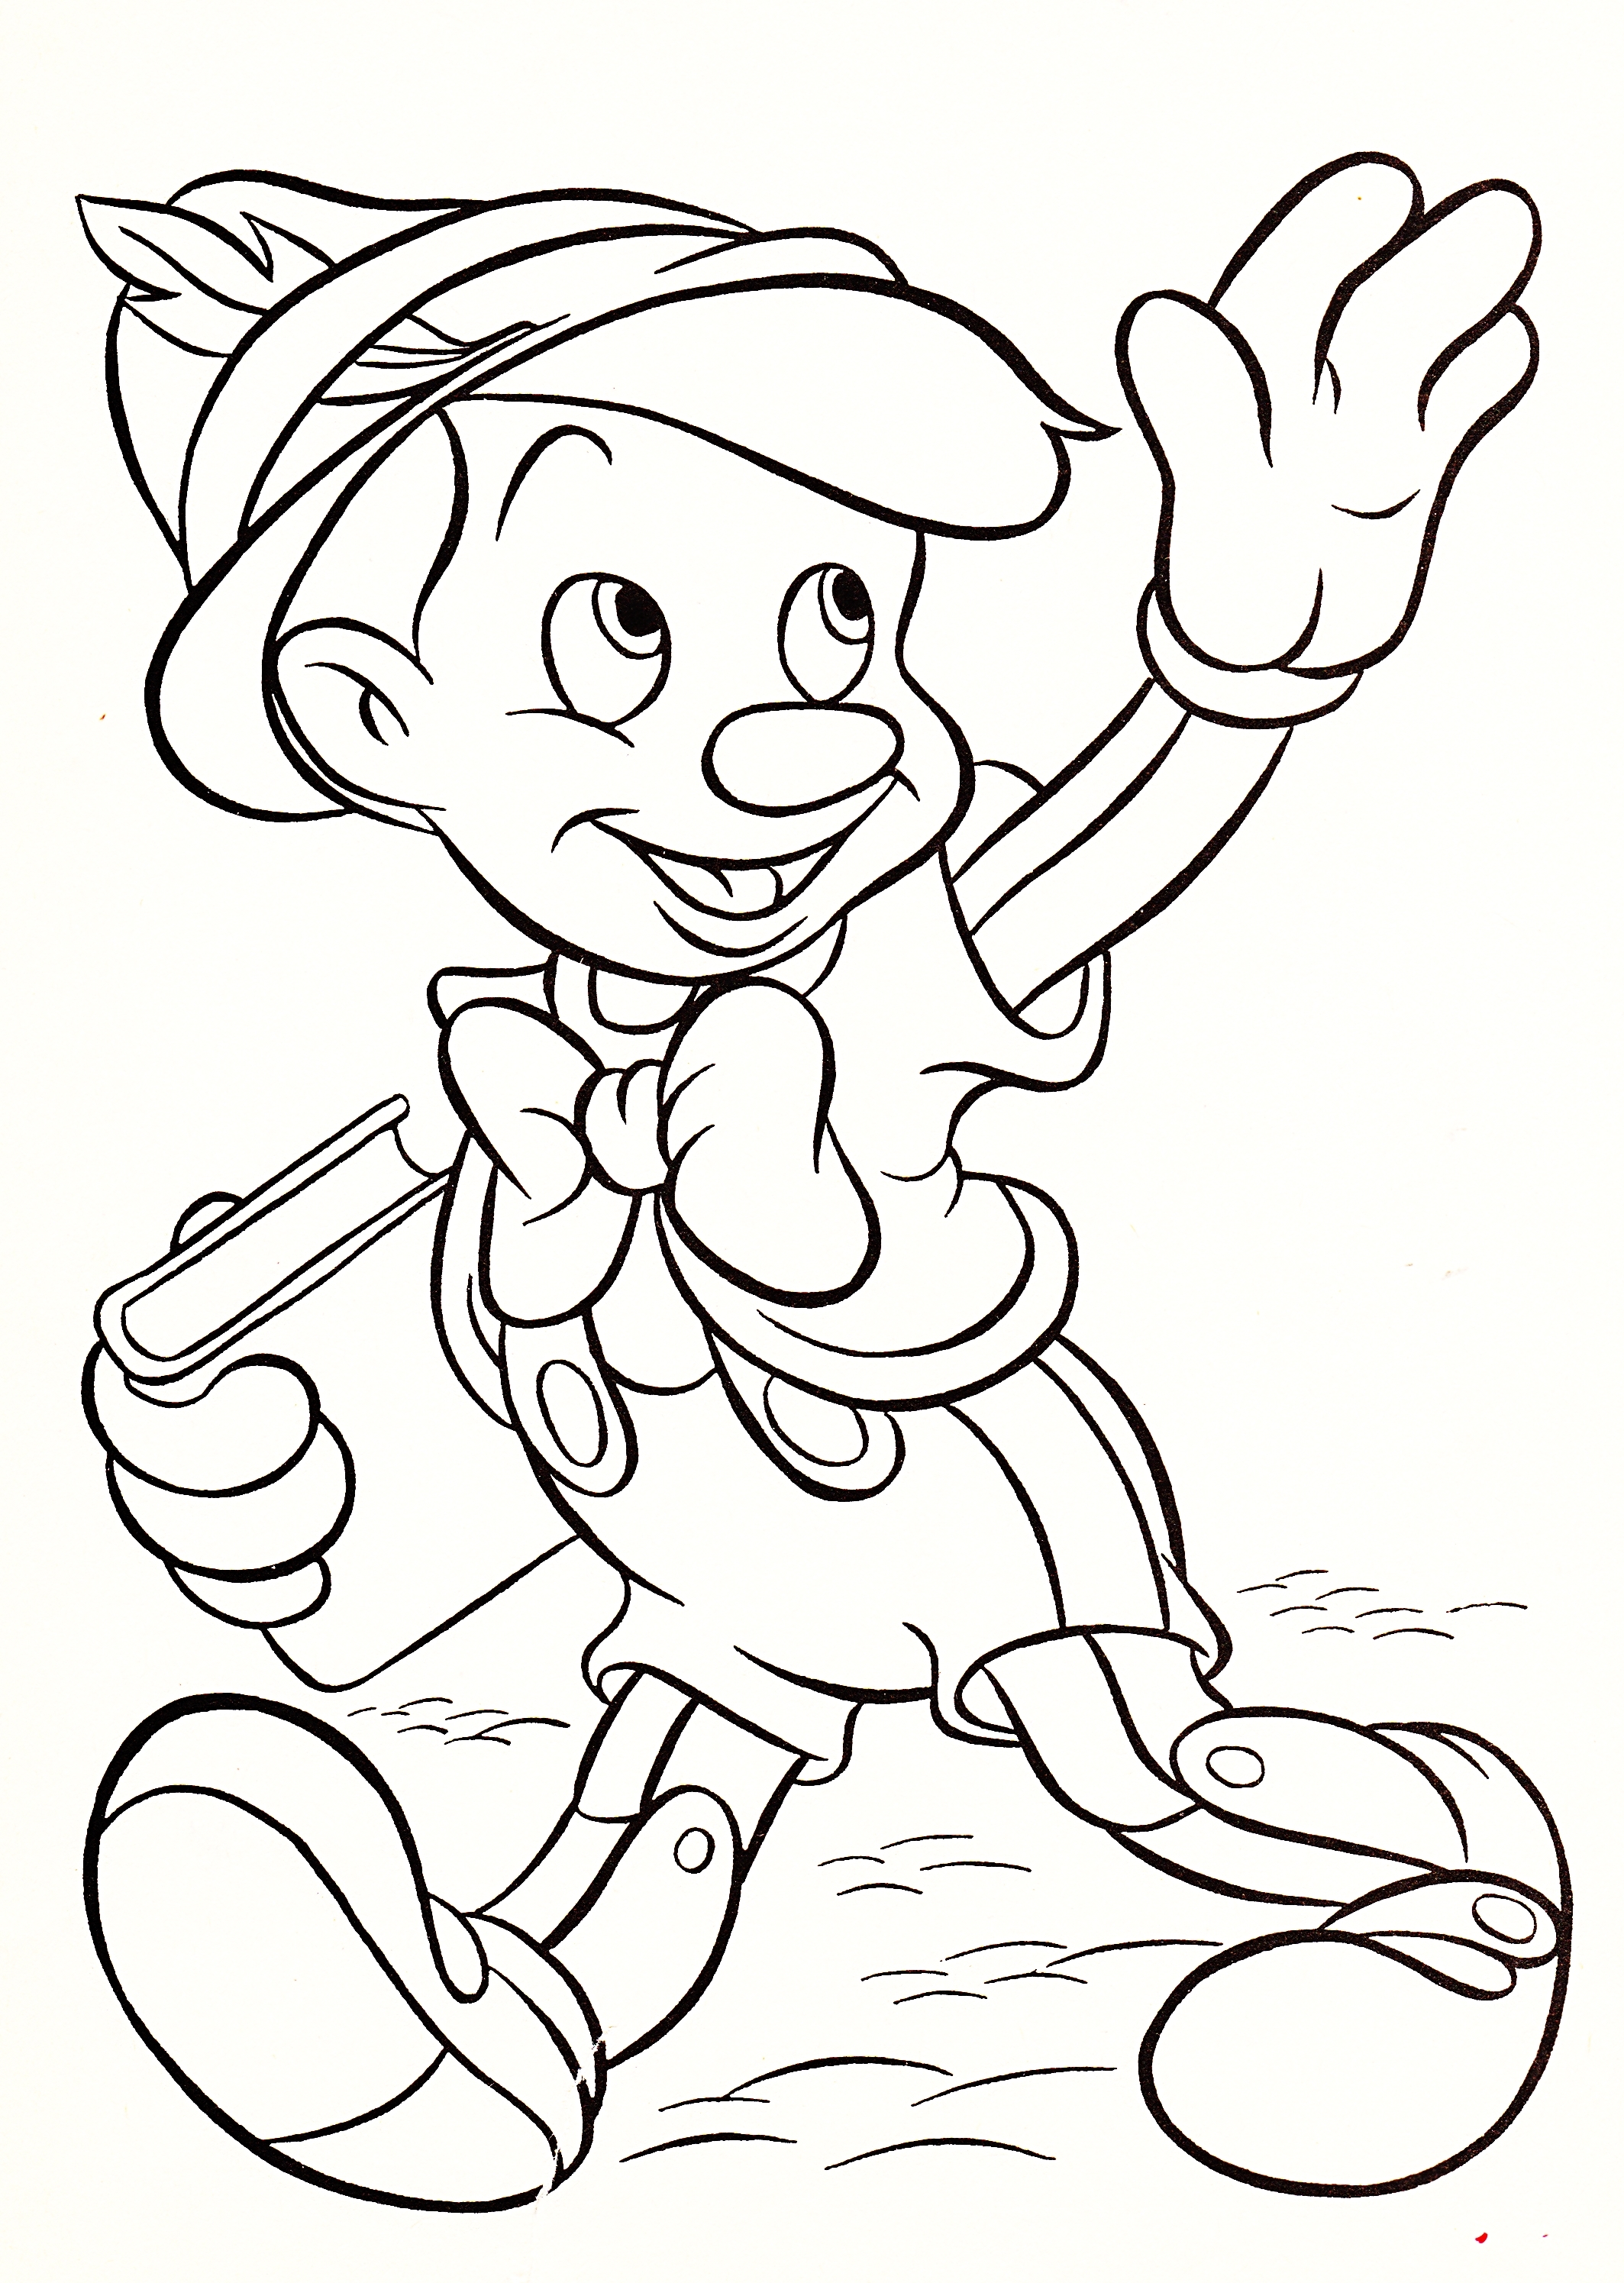 Free Coloring Pages Of Disney Characters Coloring Pages